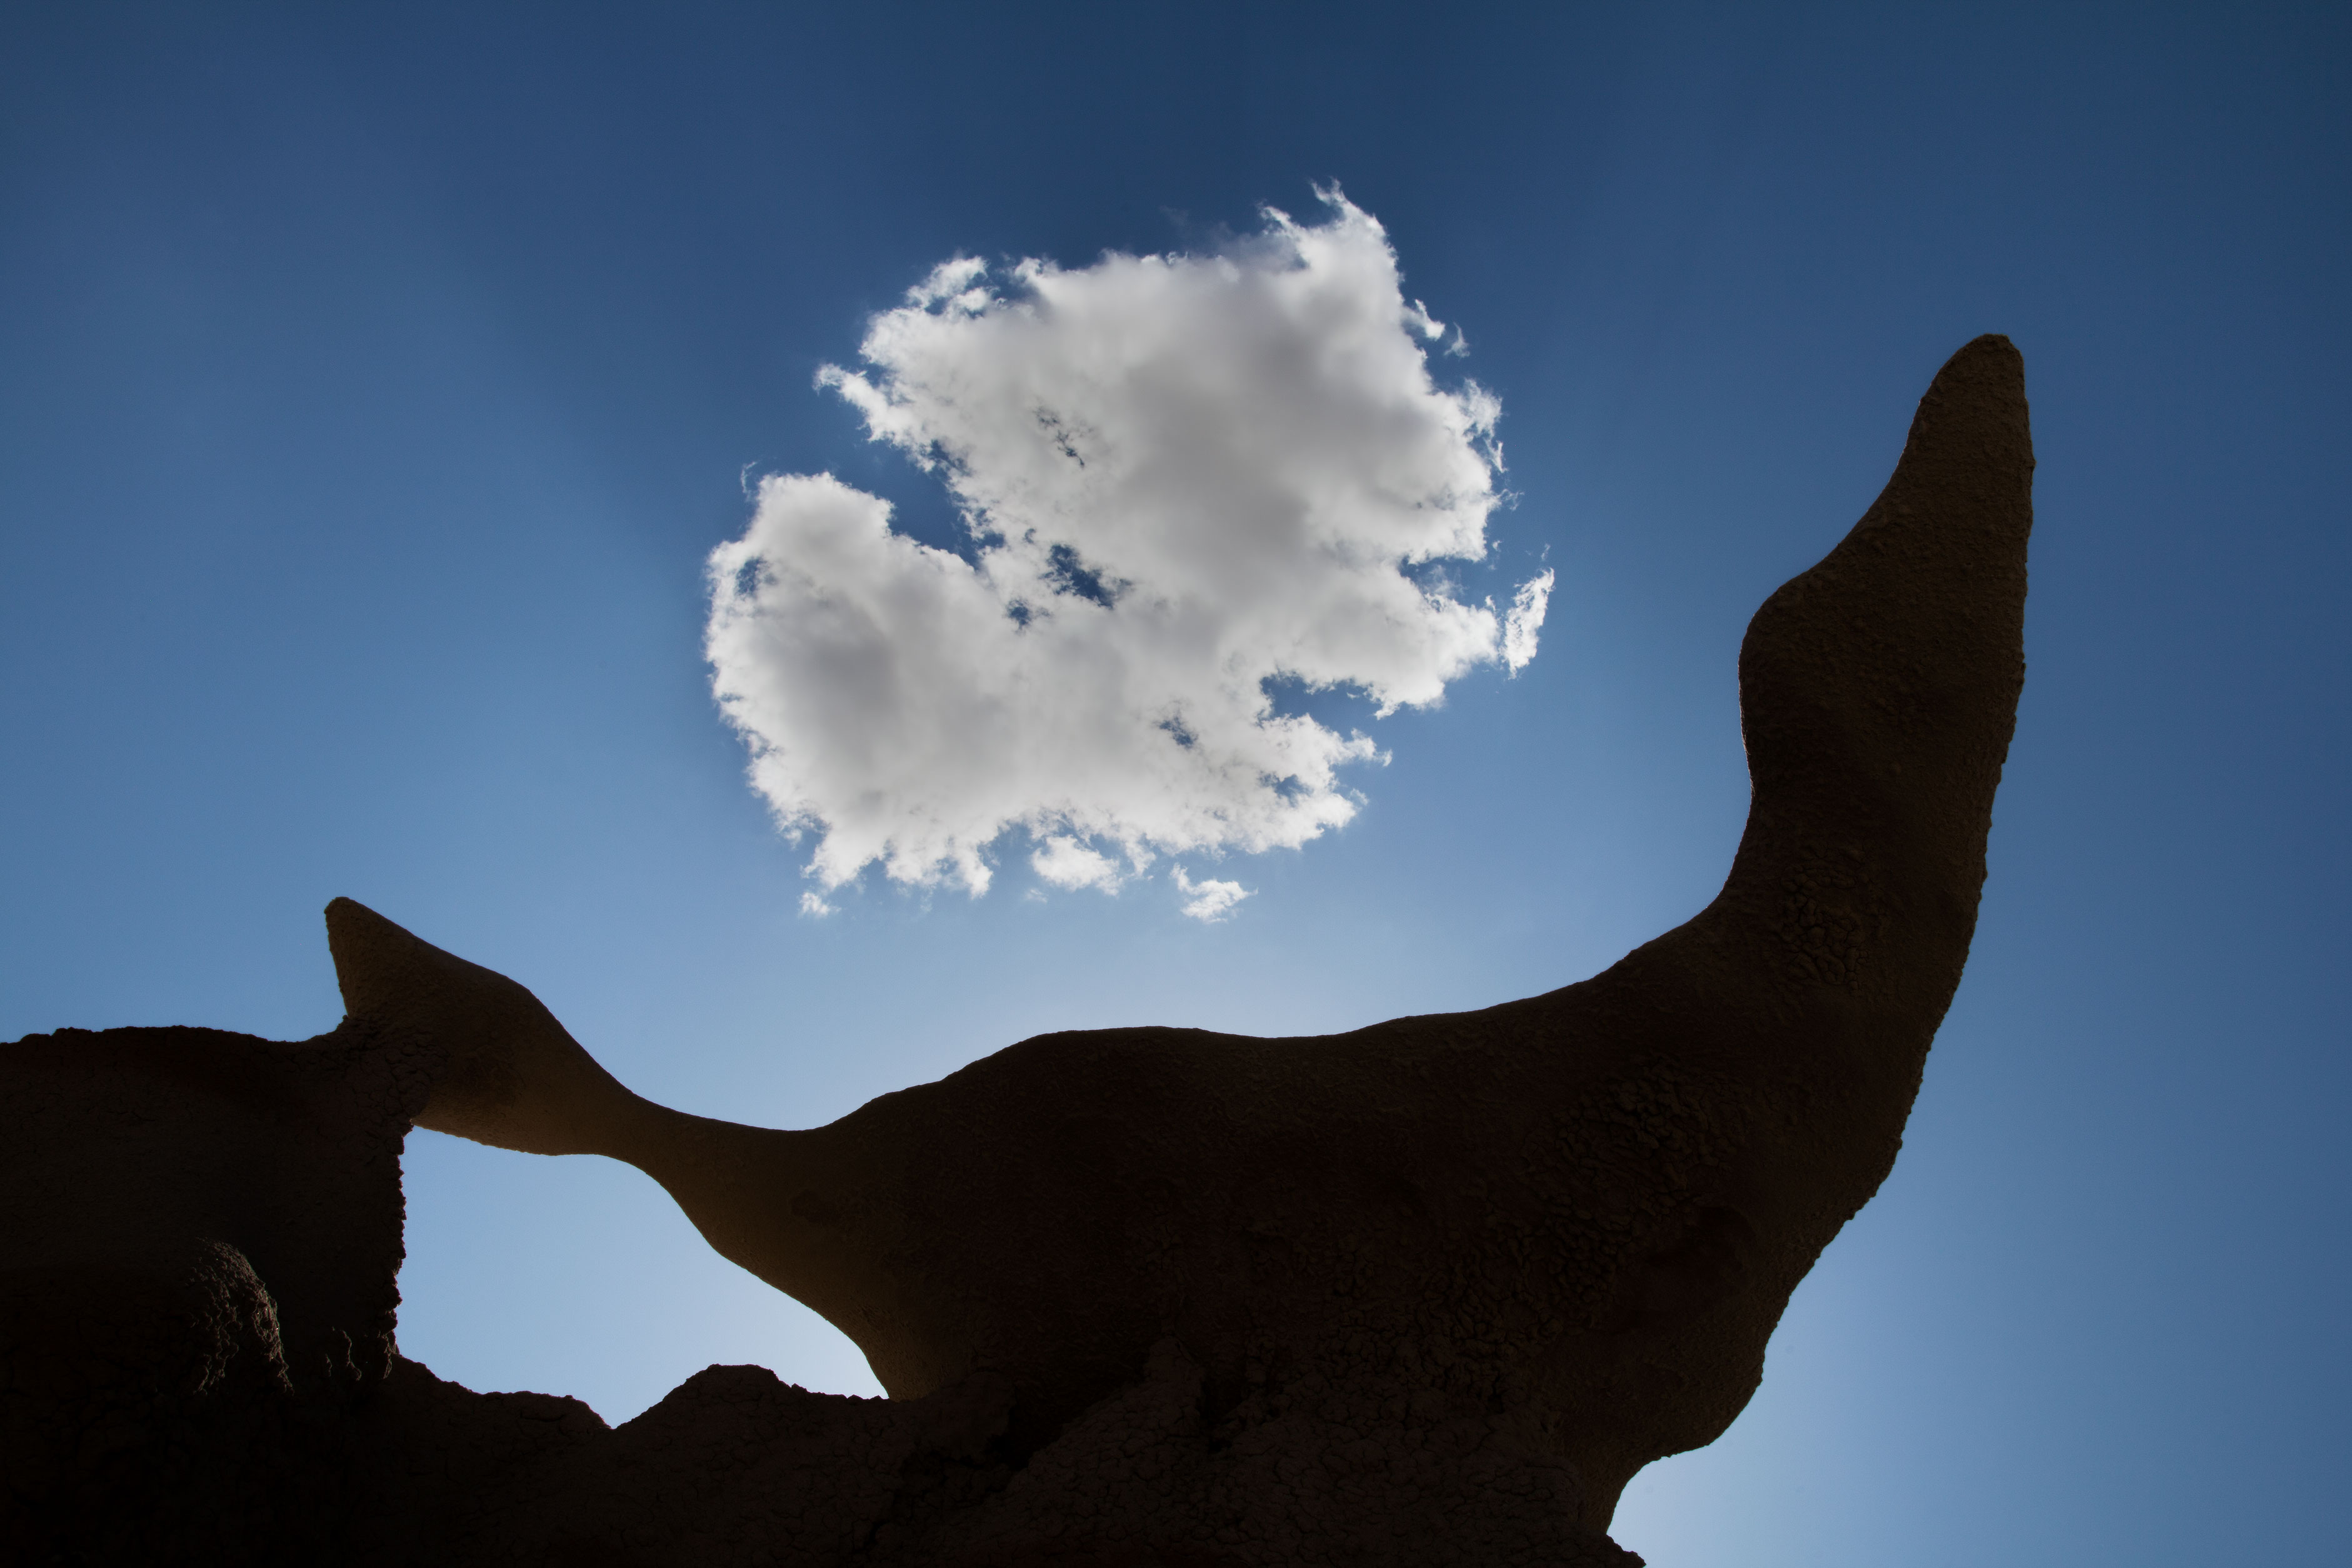 "The Seal" 100% natural rock formation with cloud in the desert at the Bisti Badlands, New Mexico